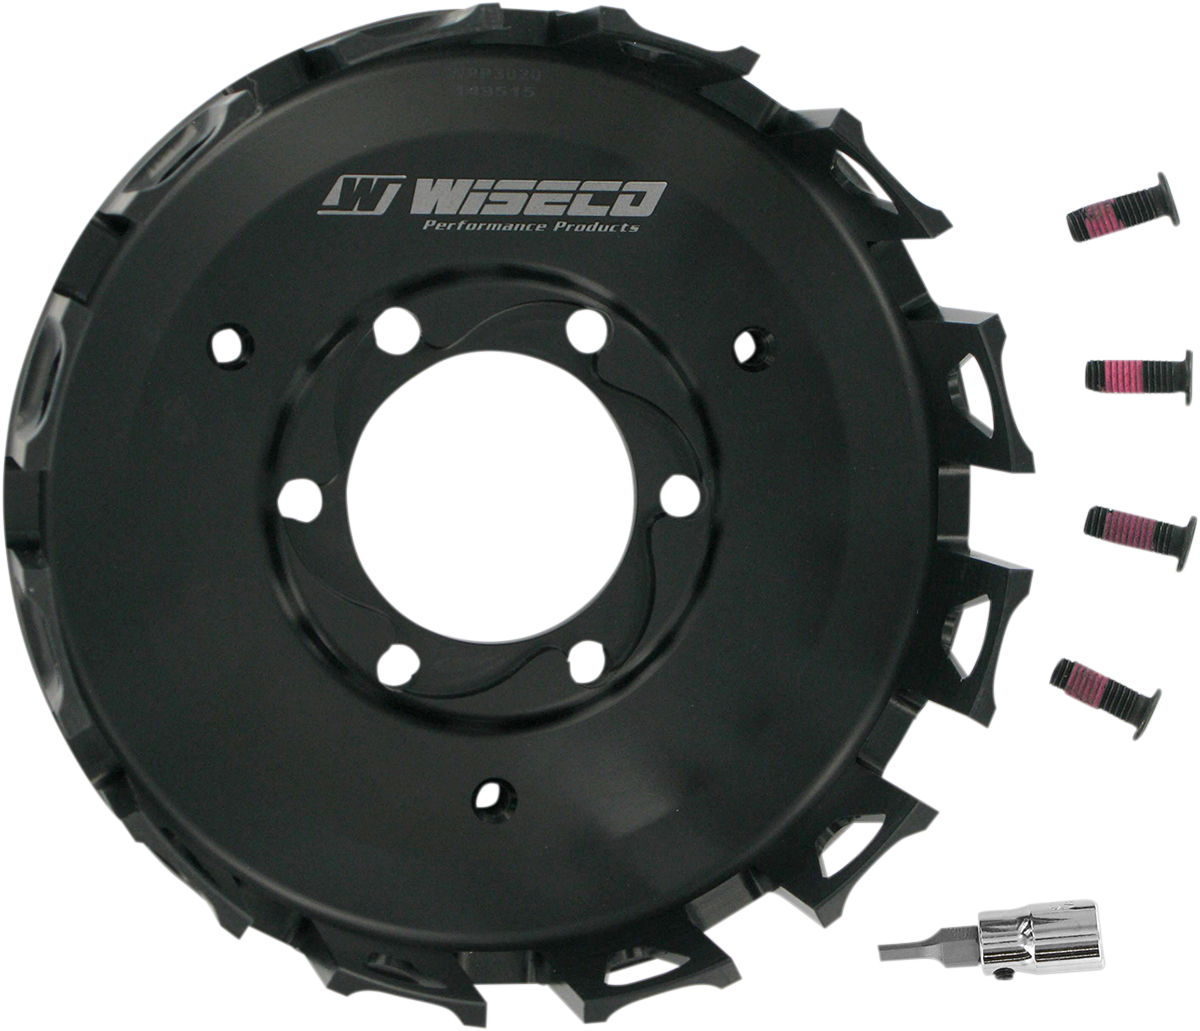 WISECO Clutch Basket Precision-Forged WPP3020